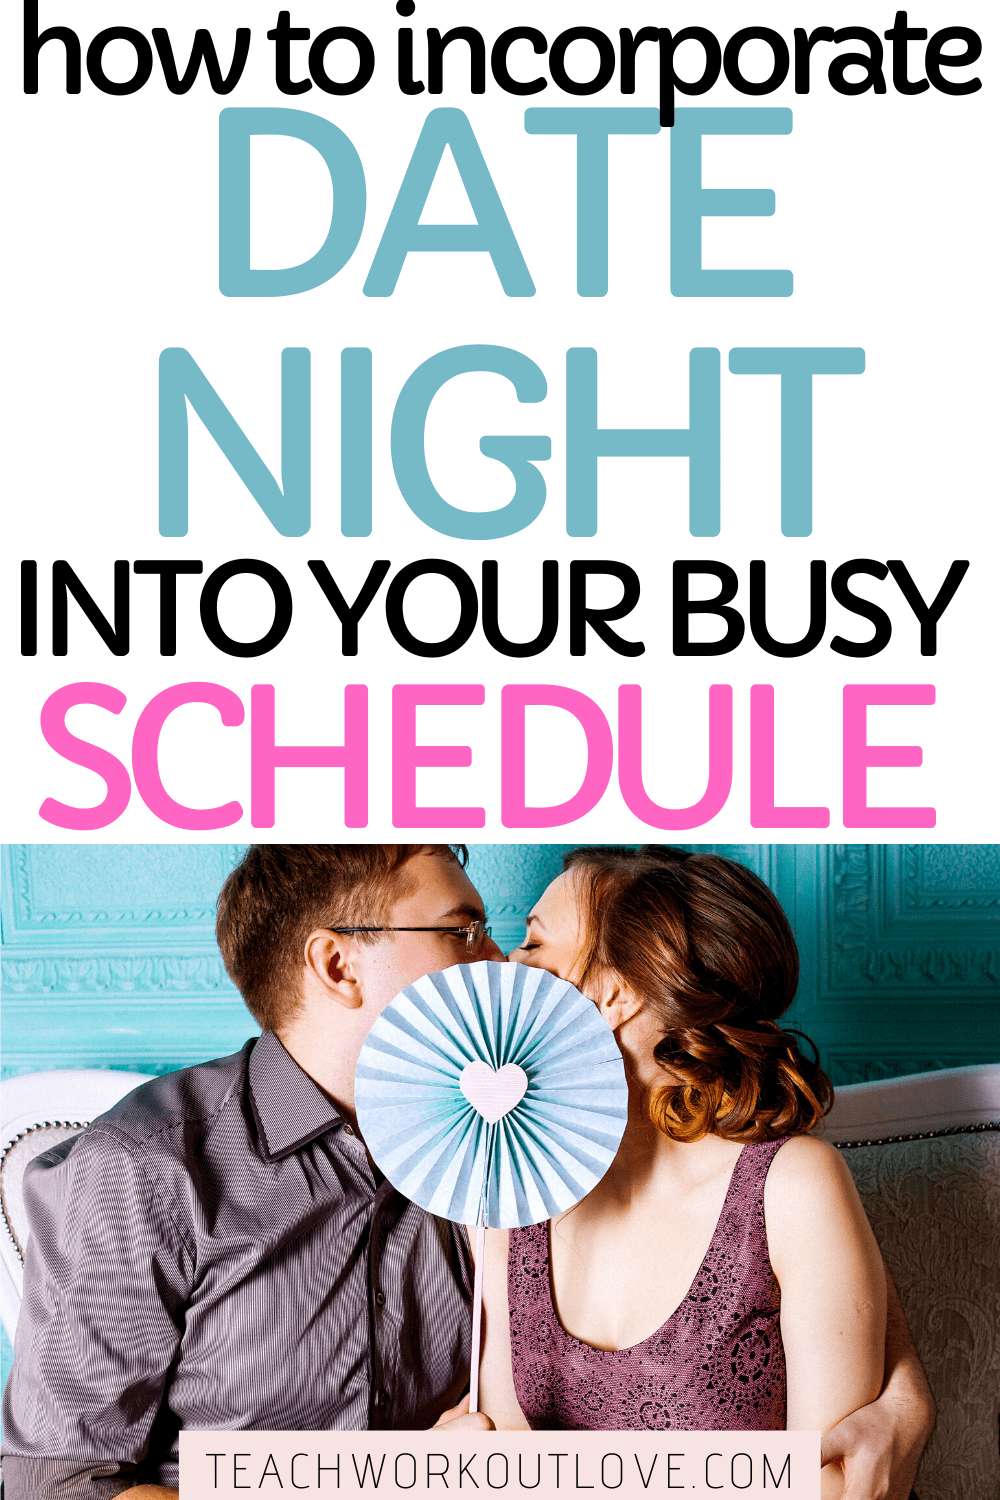 Are you struggling to find normalcy in your relationship? We're providing you with our best tips & tricks to keep your relationship strong for date night!